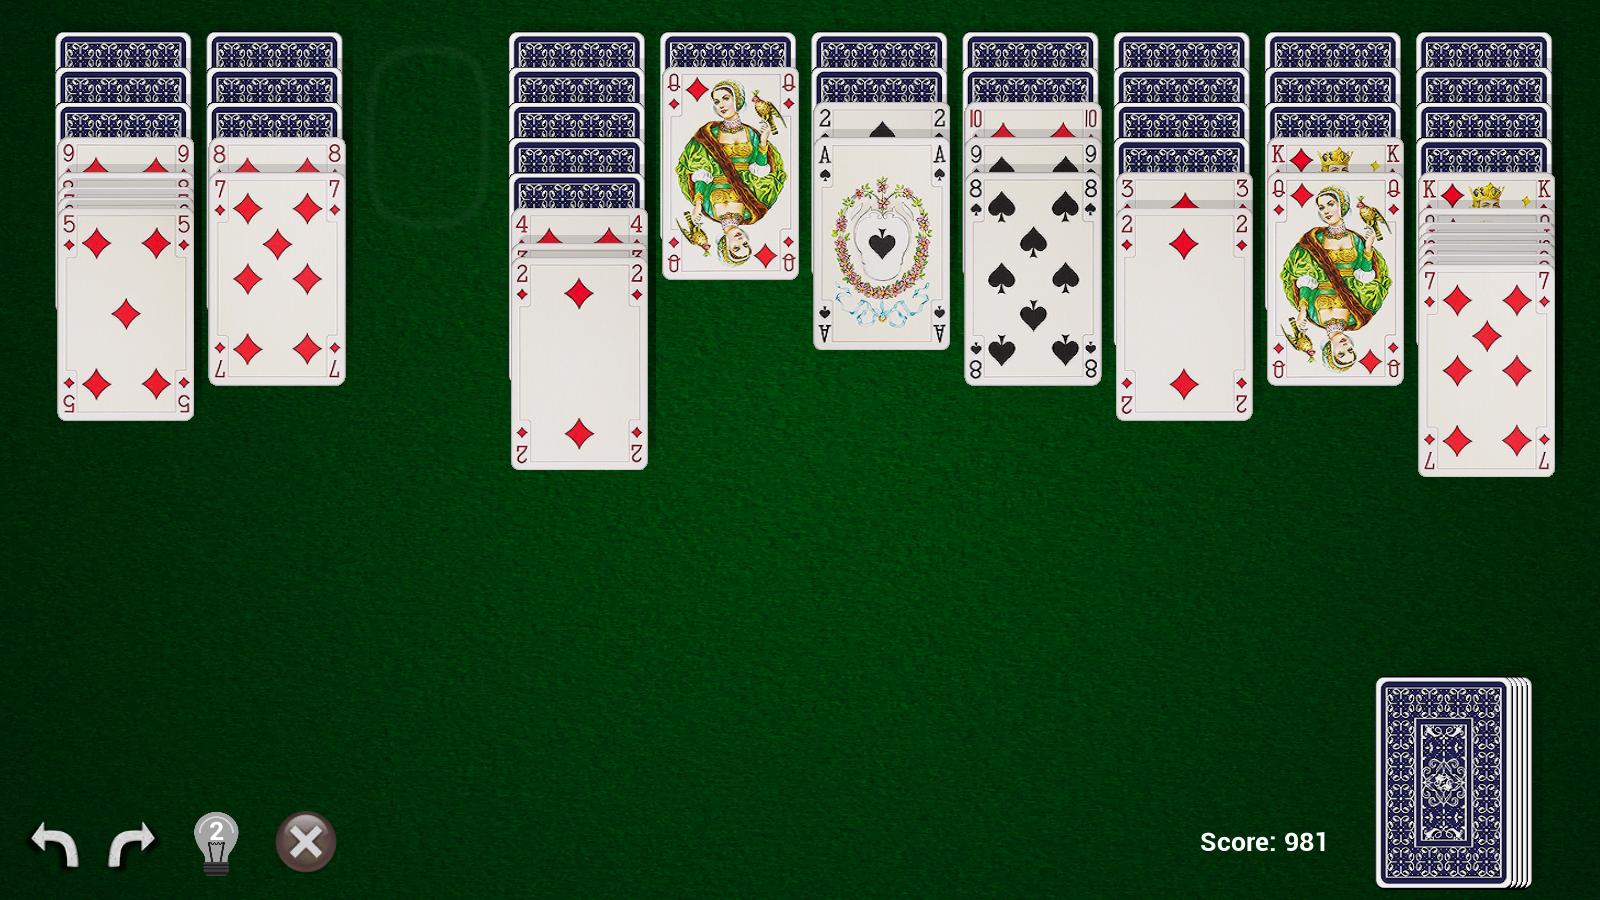 Solitaire - Casual Collection free instals